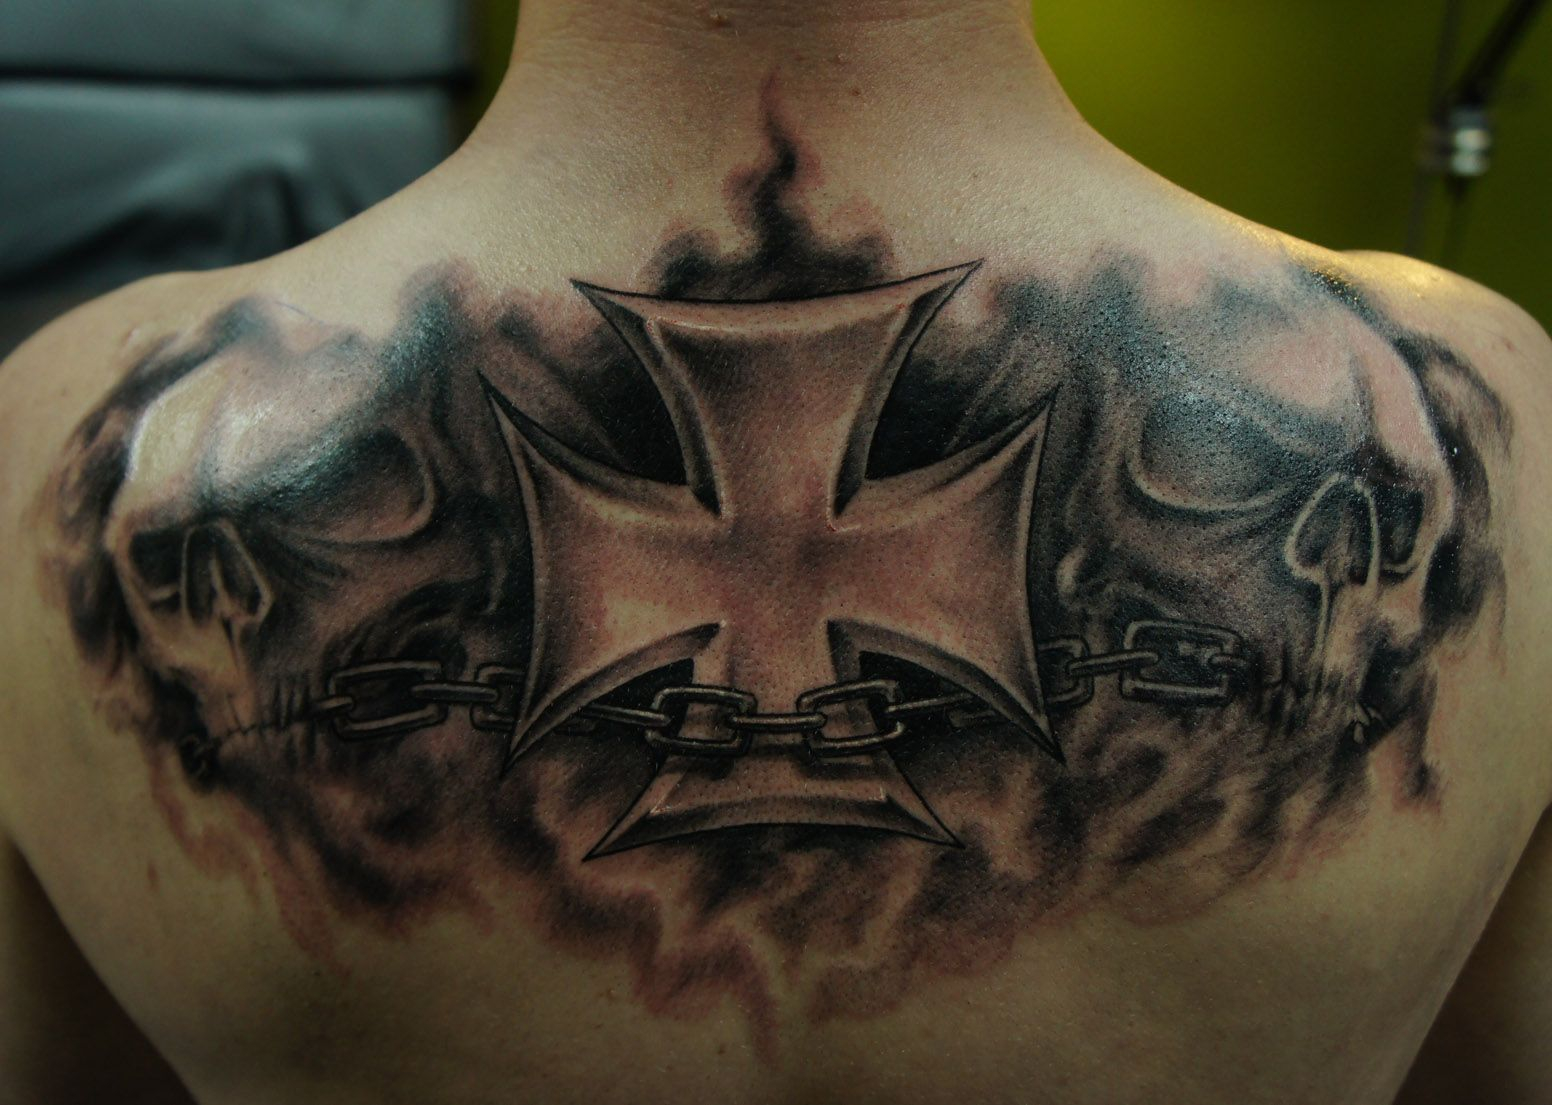 100s Of Iron Cross Tattoo Design Ideas Pictures Gallery Iron inside dimensions 1552 X 1105